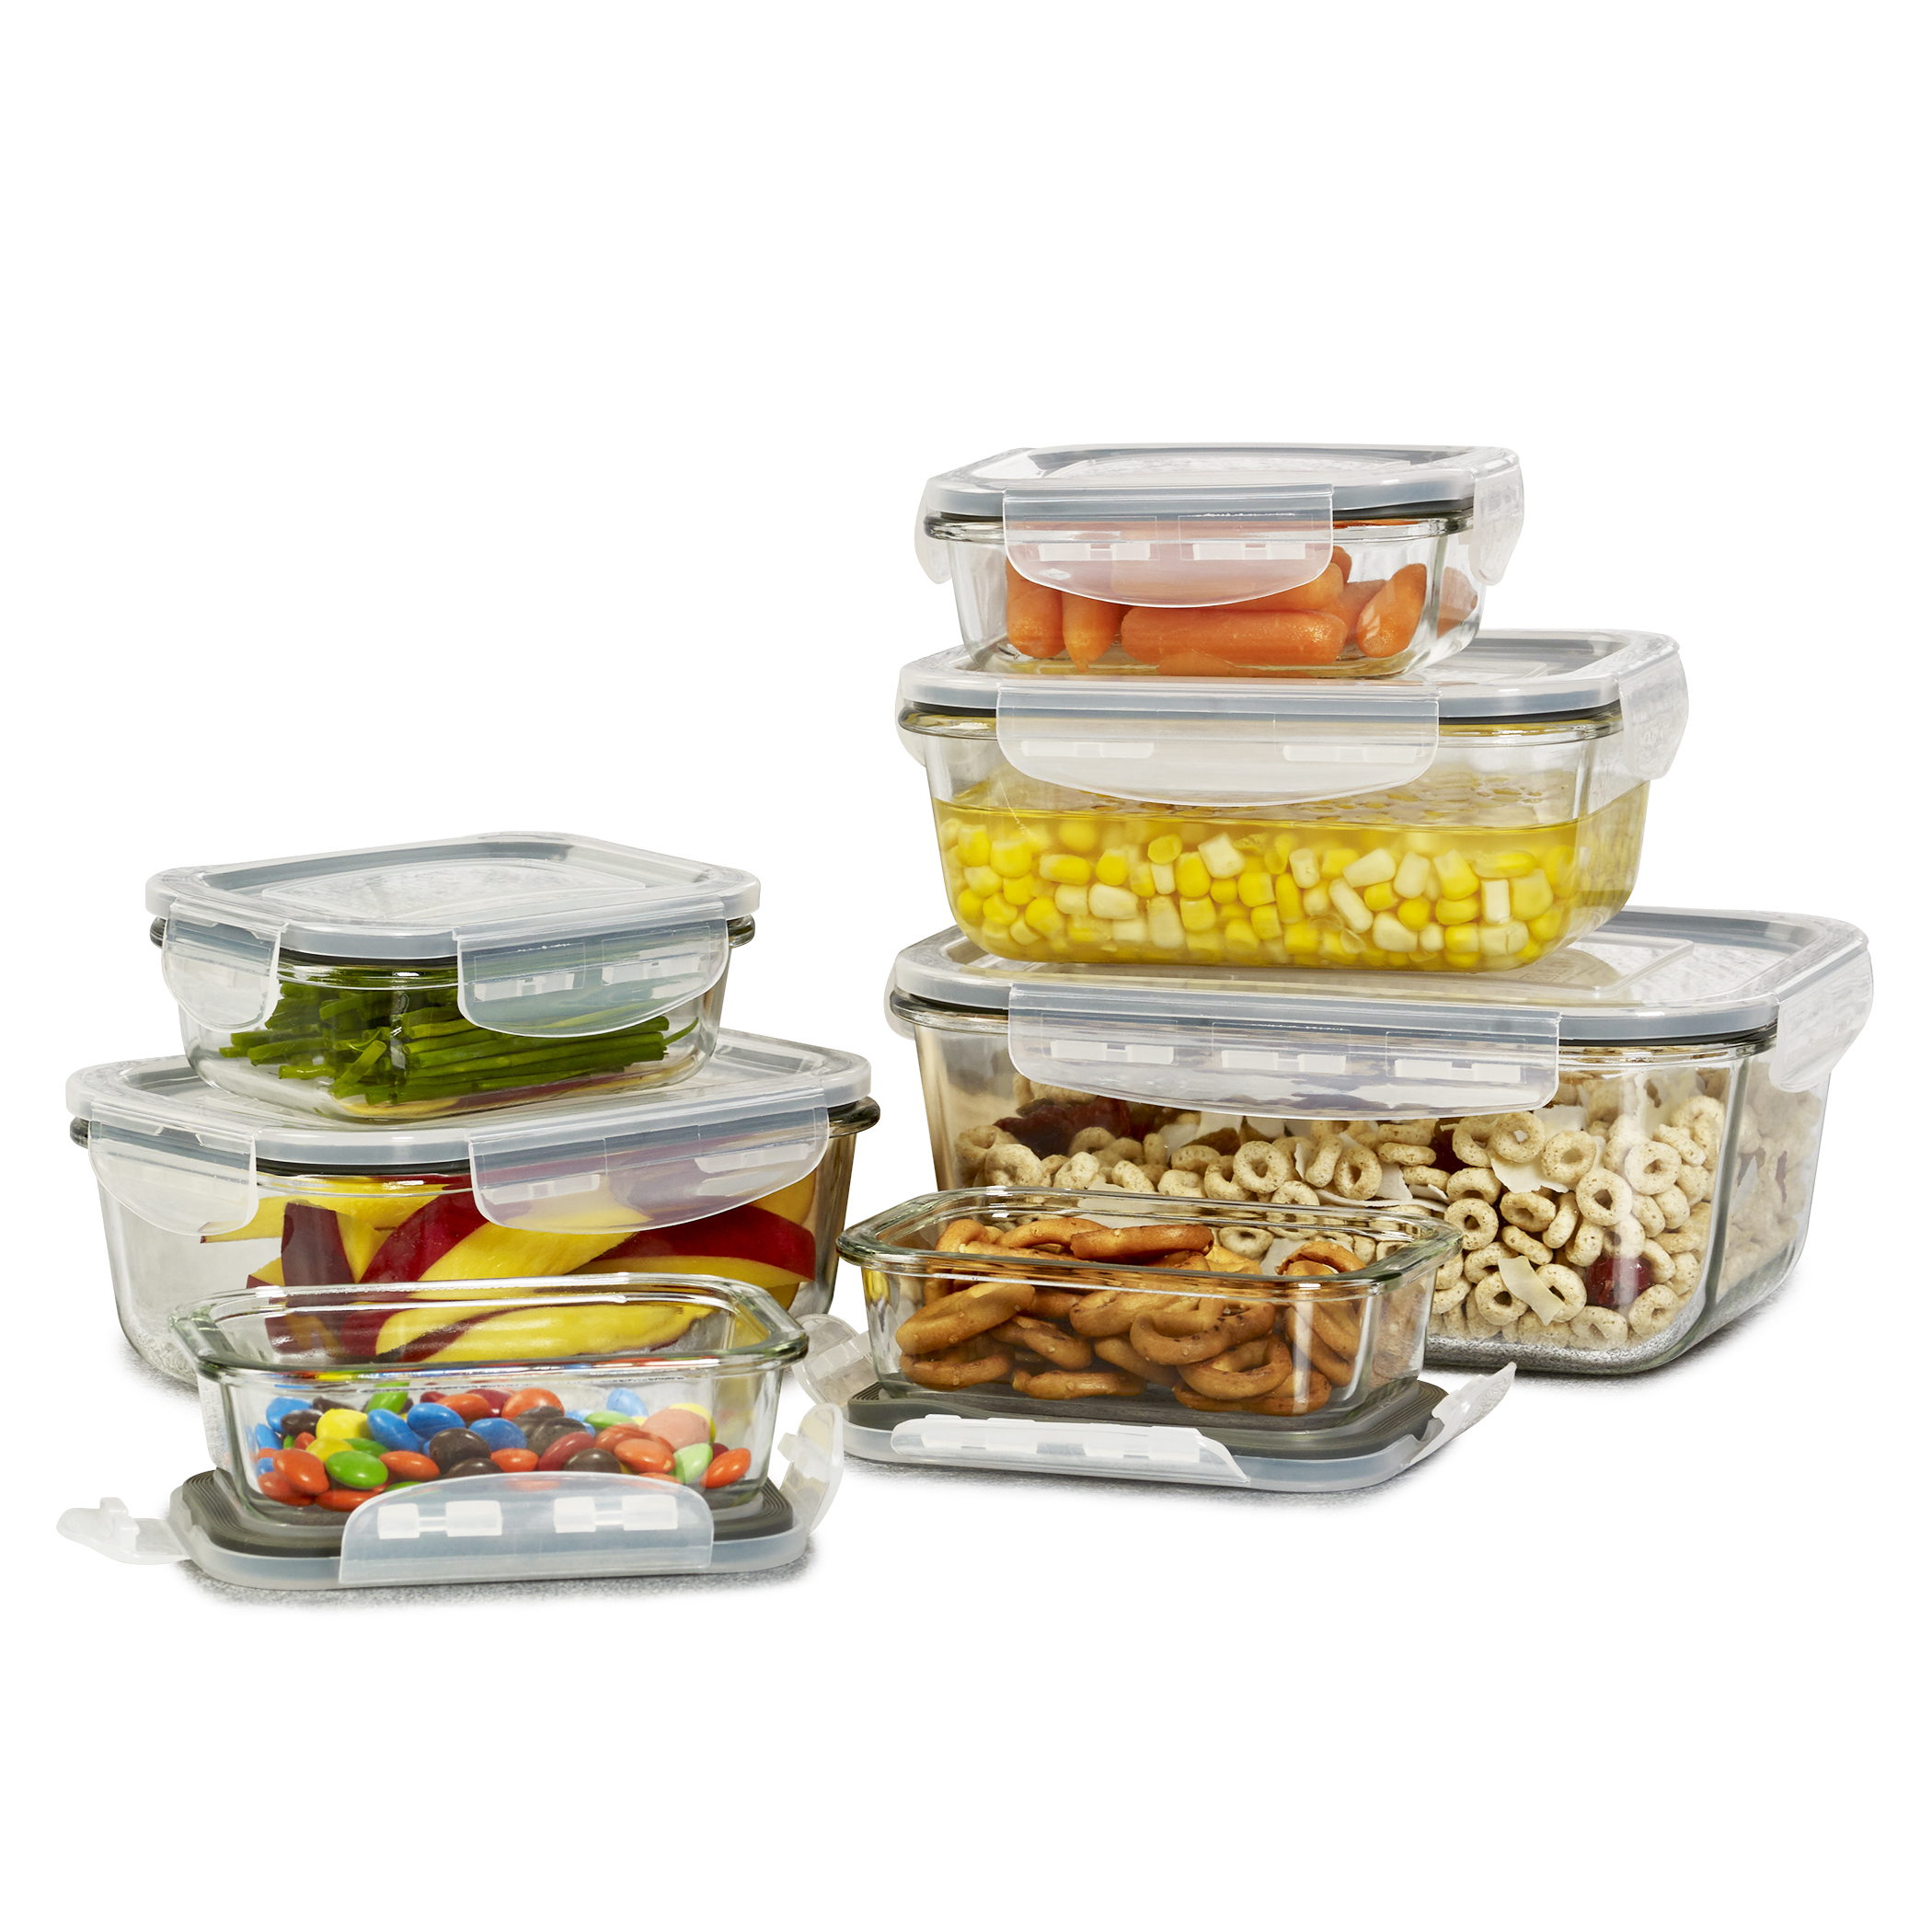 Tabletops Unlimited, Inc 14pc. Glass Storage Container Set